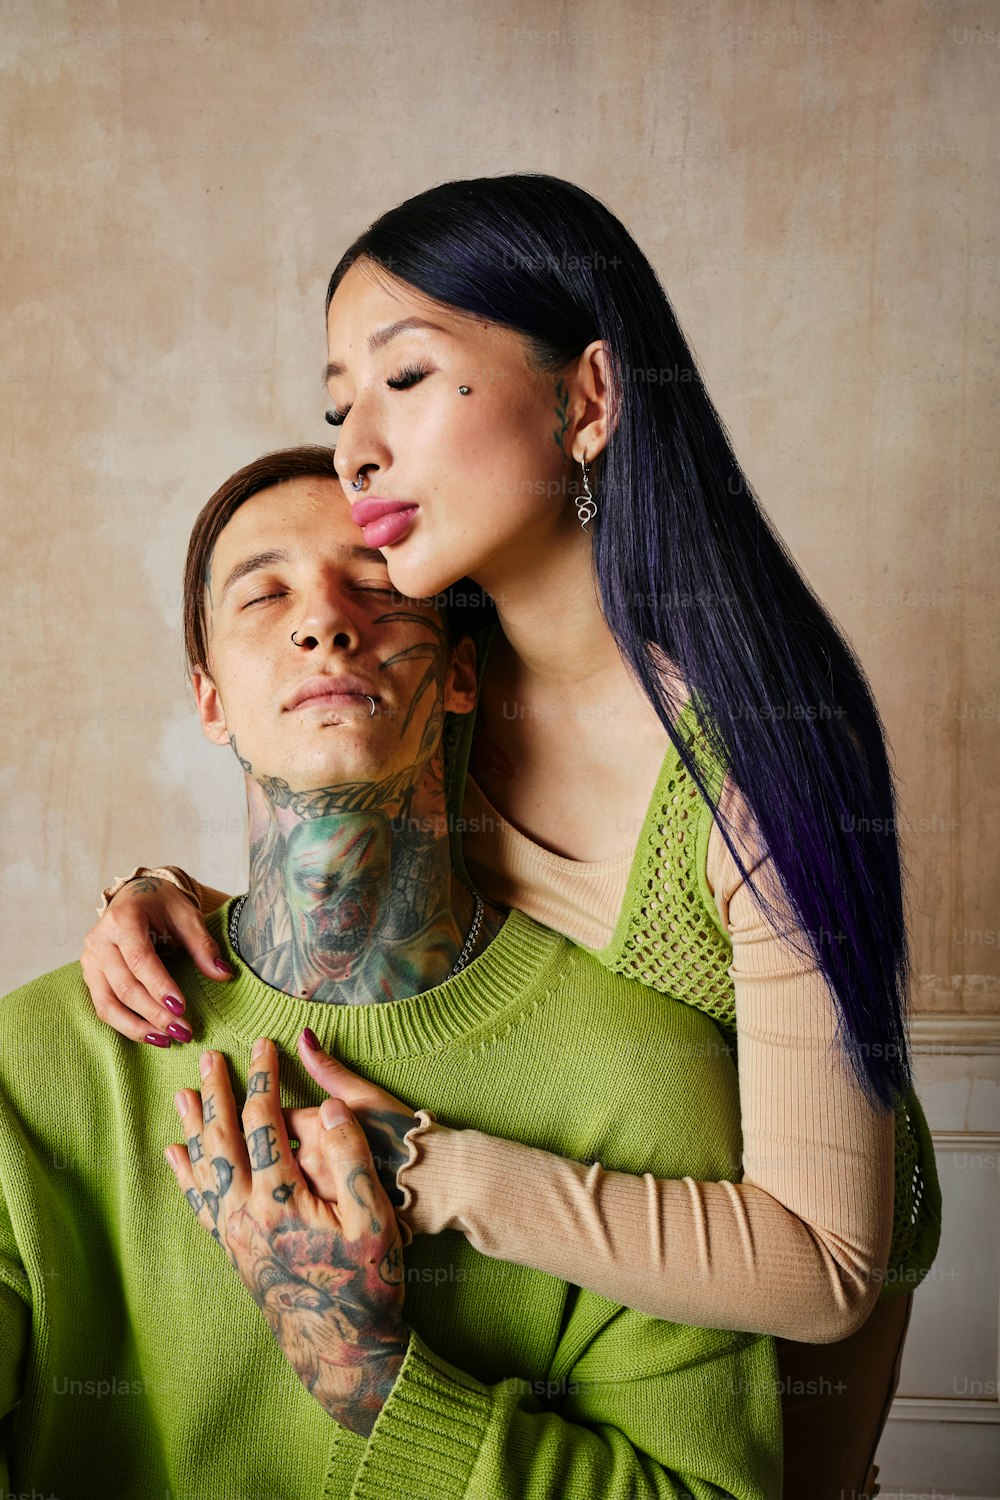 a woman is hugging a man with tattoos on his face